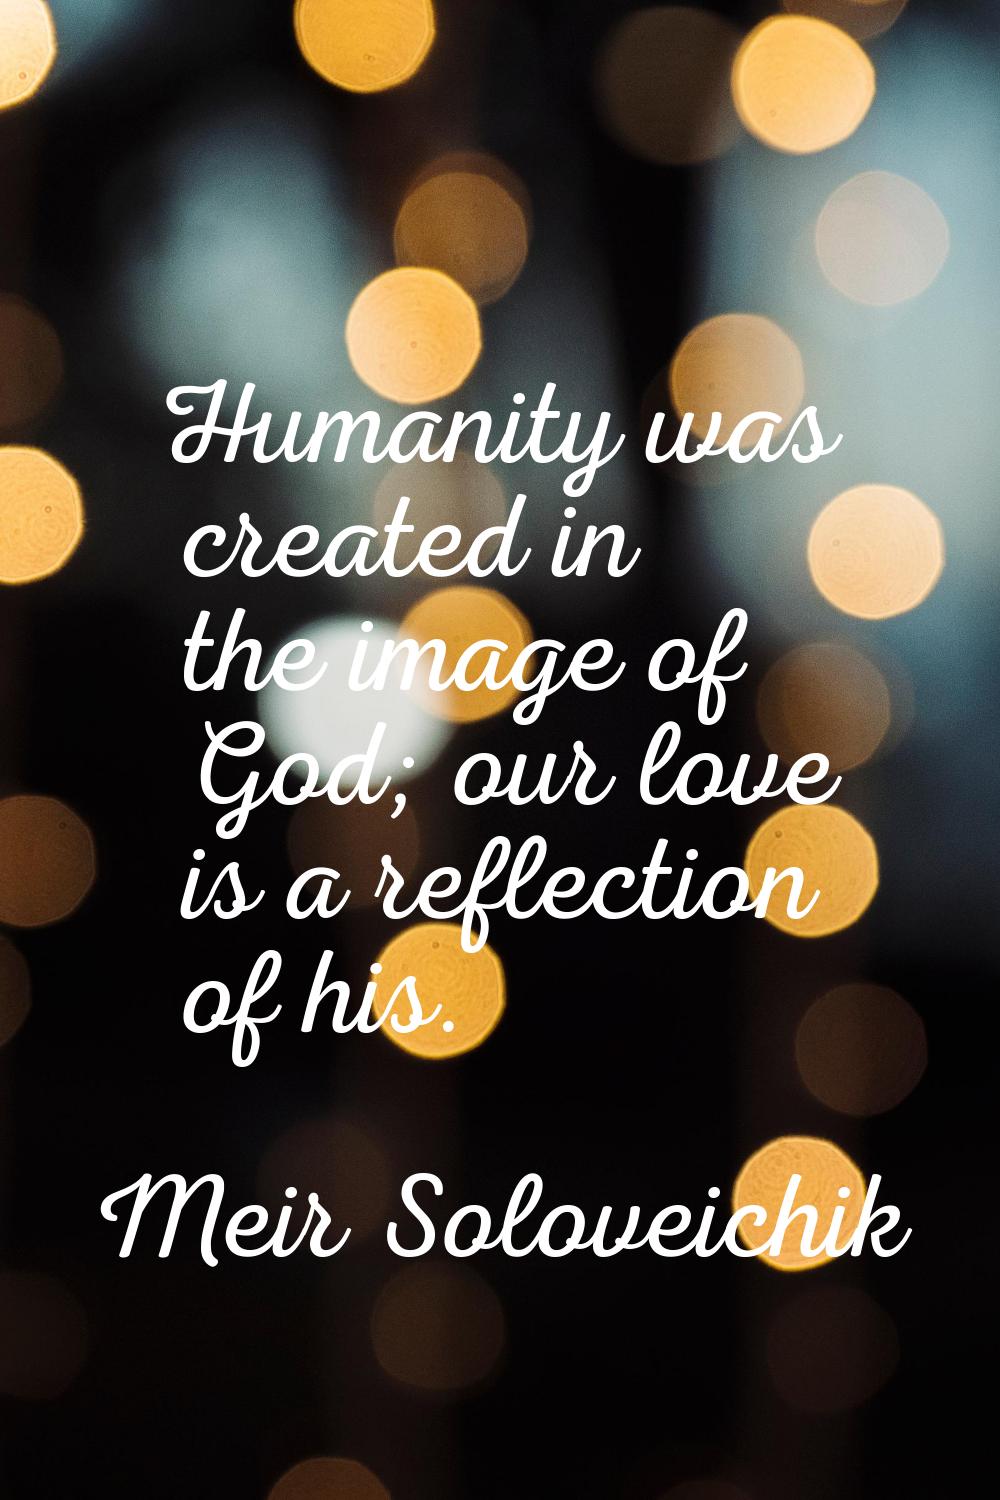 Humanity was created in the image of God; our love is a reflection of his.